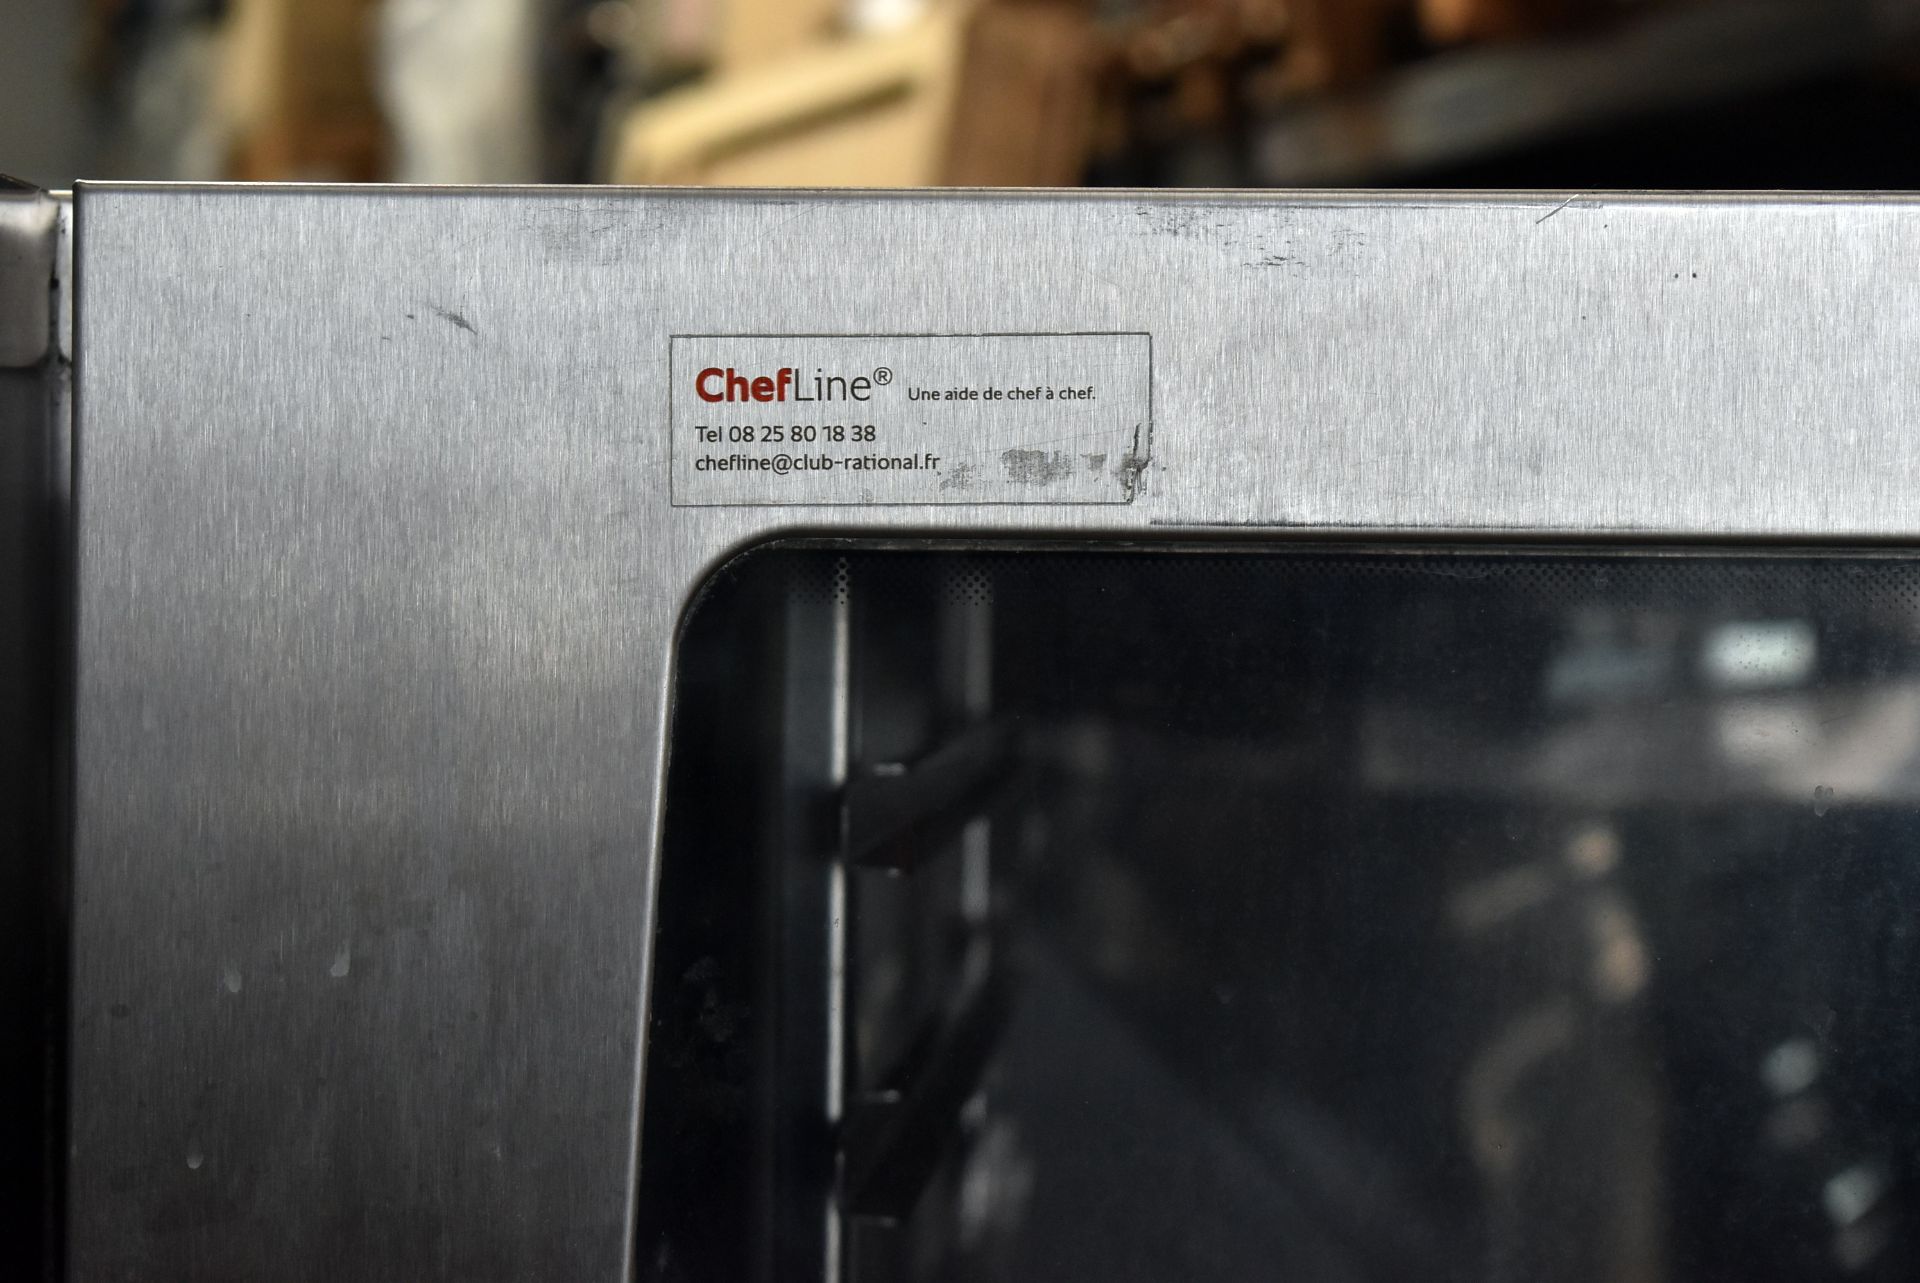 1 x Rational CombiMaster Plus 10 Grid Combi Oven - Type: CMP 102 - 3 Phase - Image 12 of 23